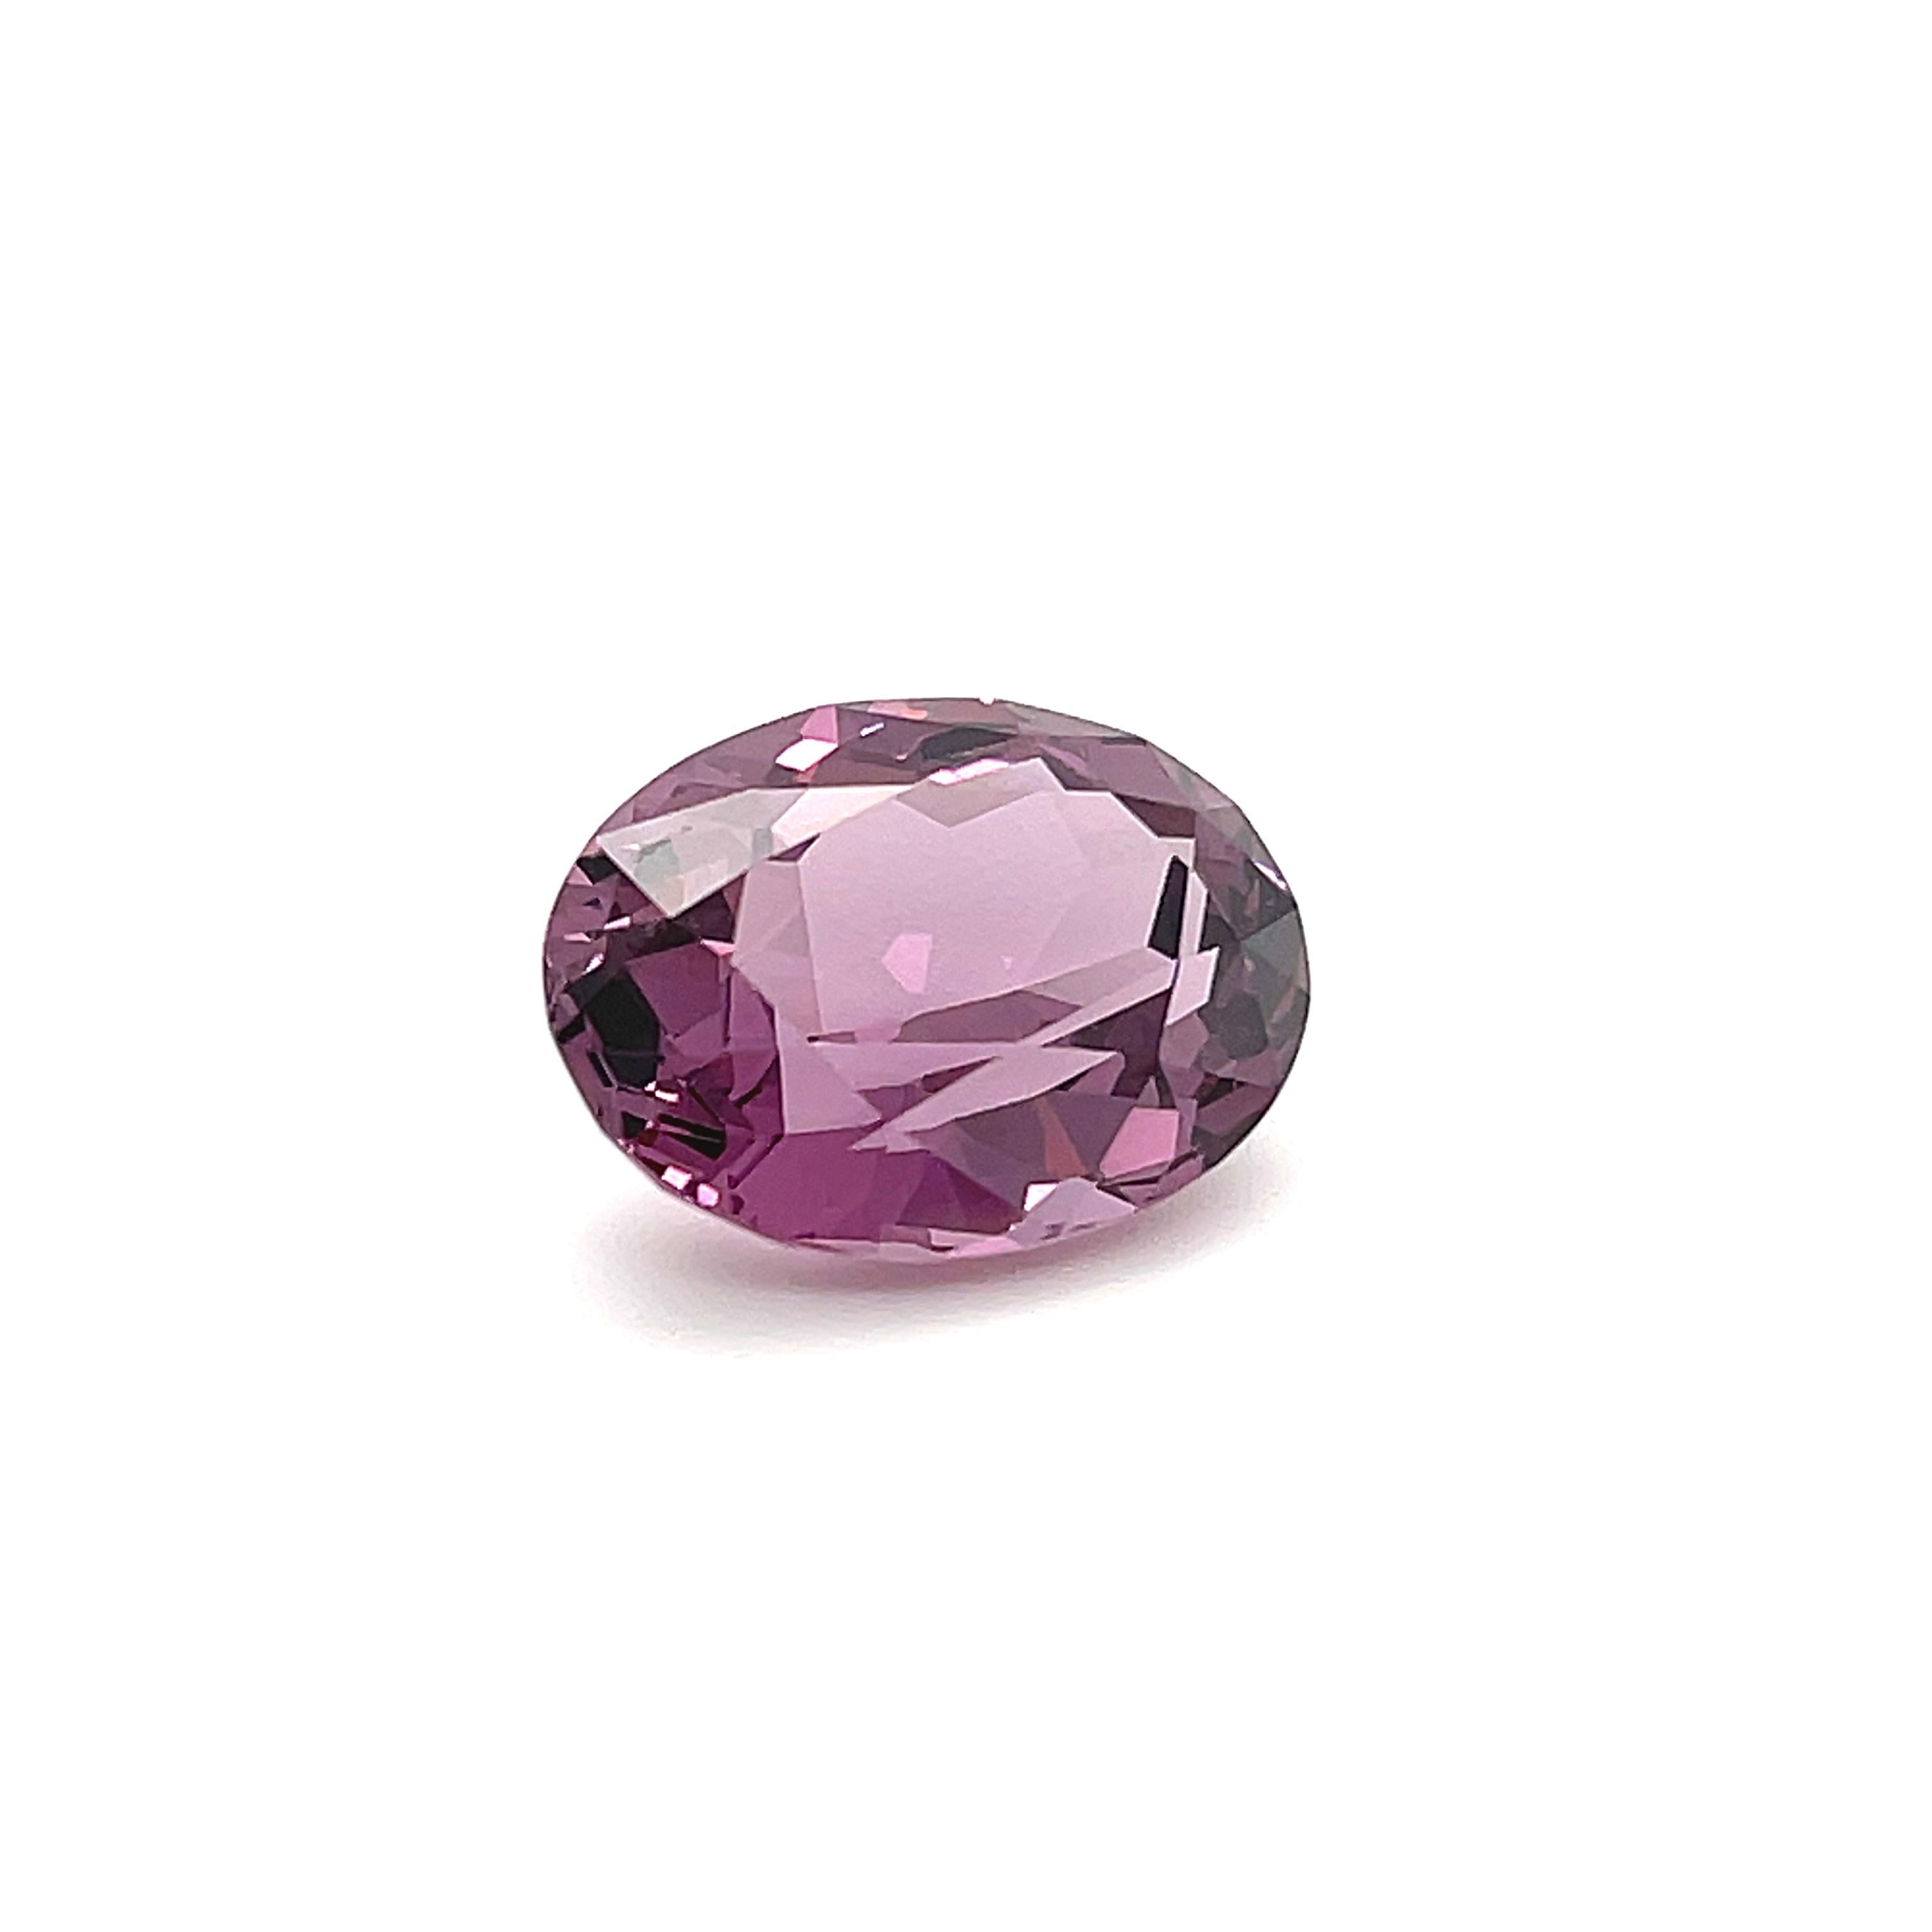 15.3ct Spinel Oval cut
Color: Purple
Provenance: Ratnapura District, Sabaragamuw
Dimensions: 17,53 x 13,57 x 8,9 mm
Clarity: Flawless